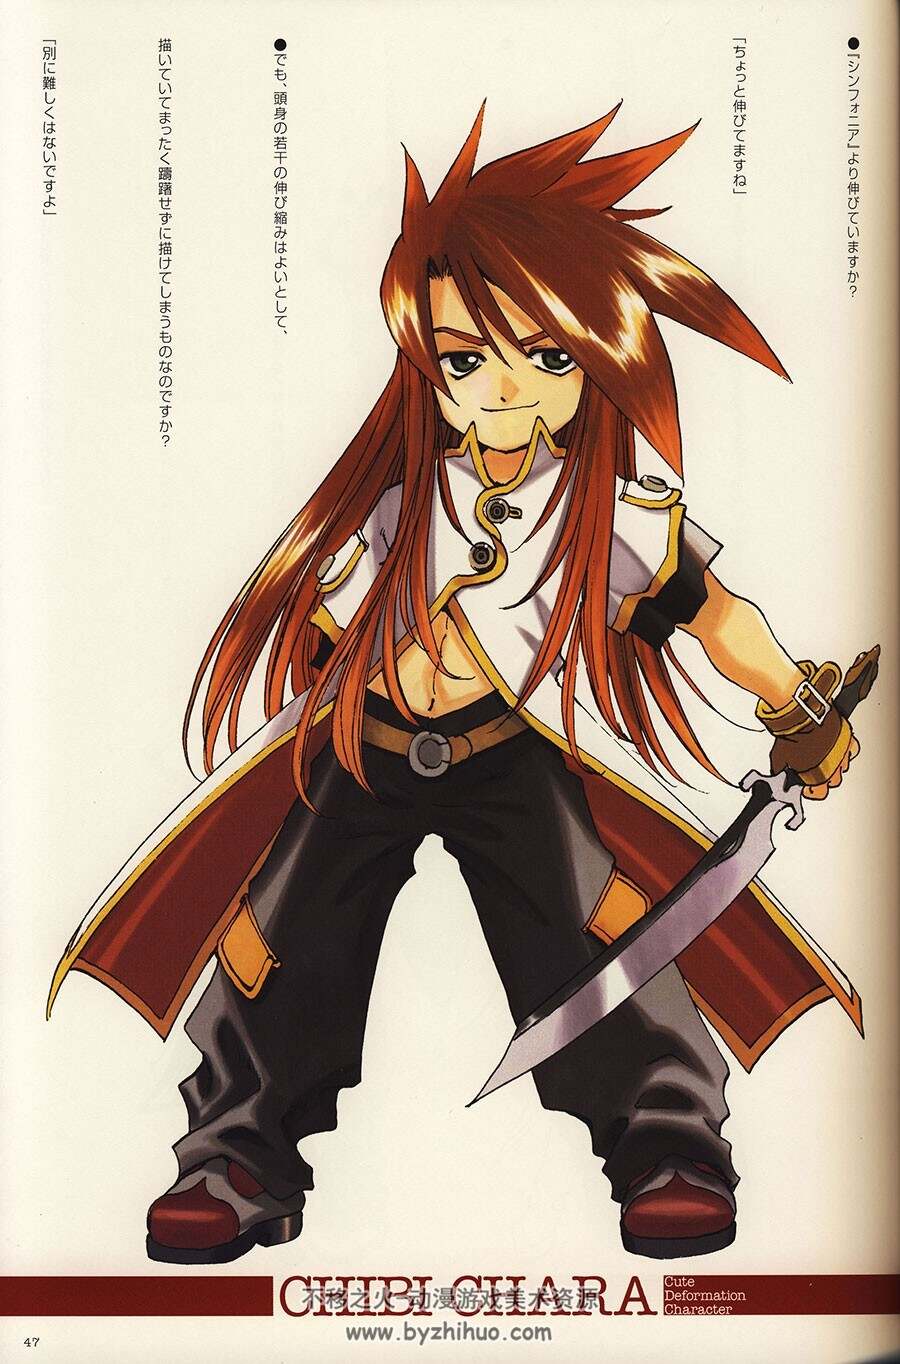 Tales of the Abyss Illustrations 深渊传说人设原画集 藤岛康介